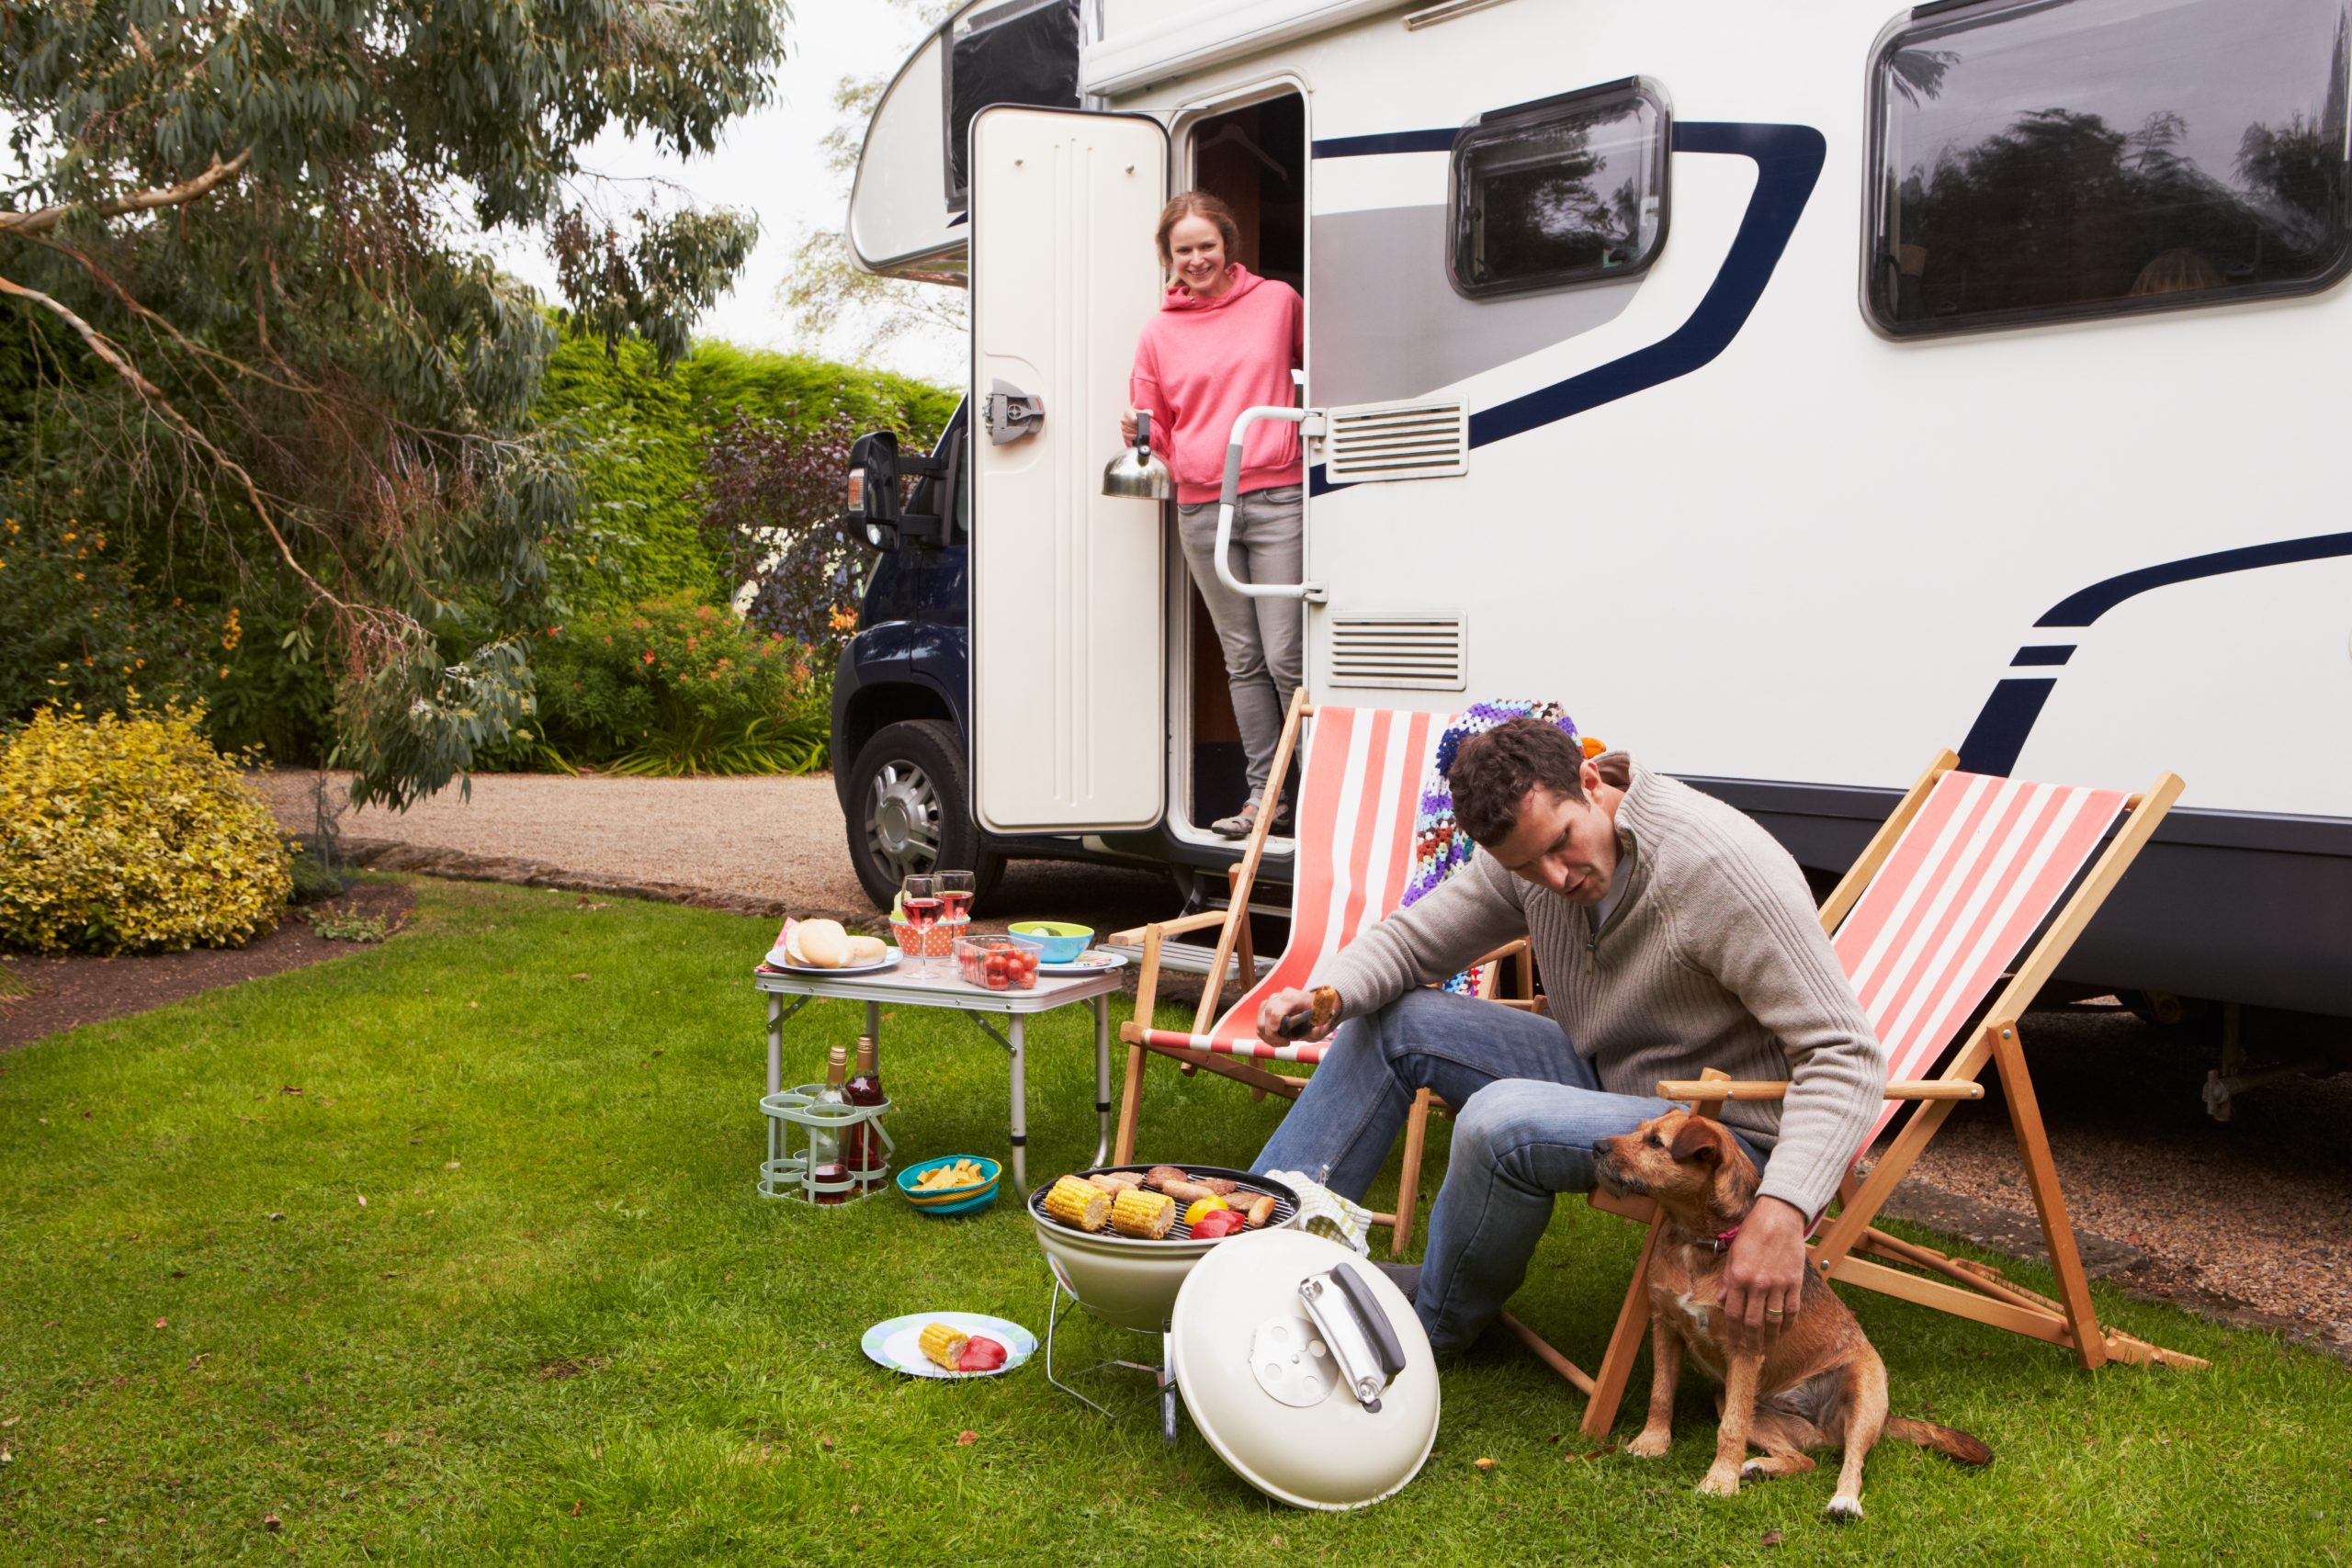 RVing with Your Dog